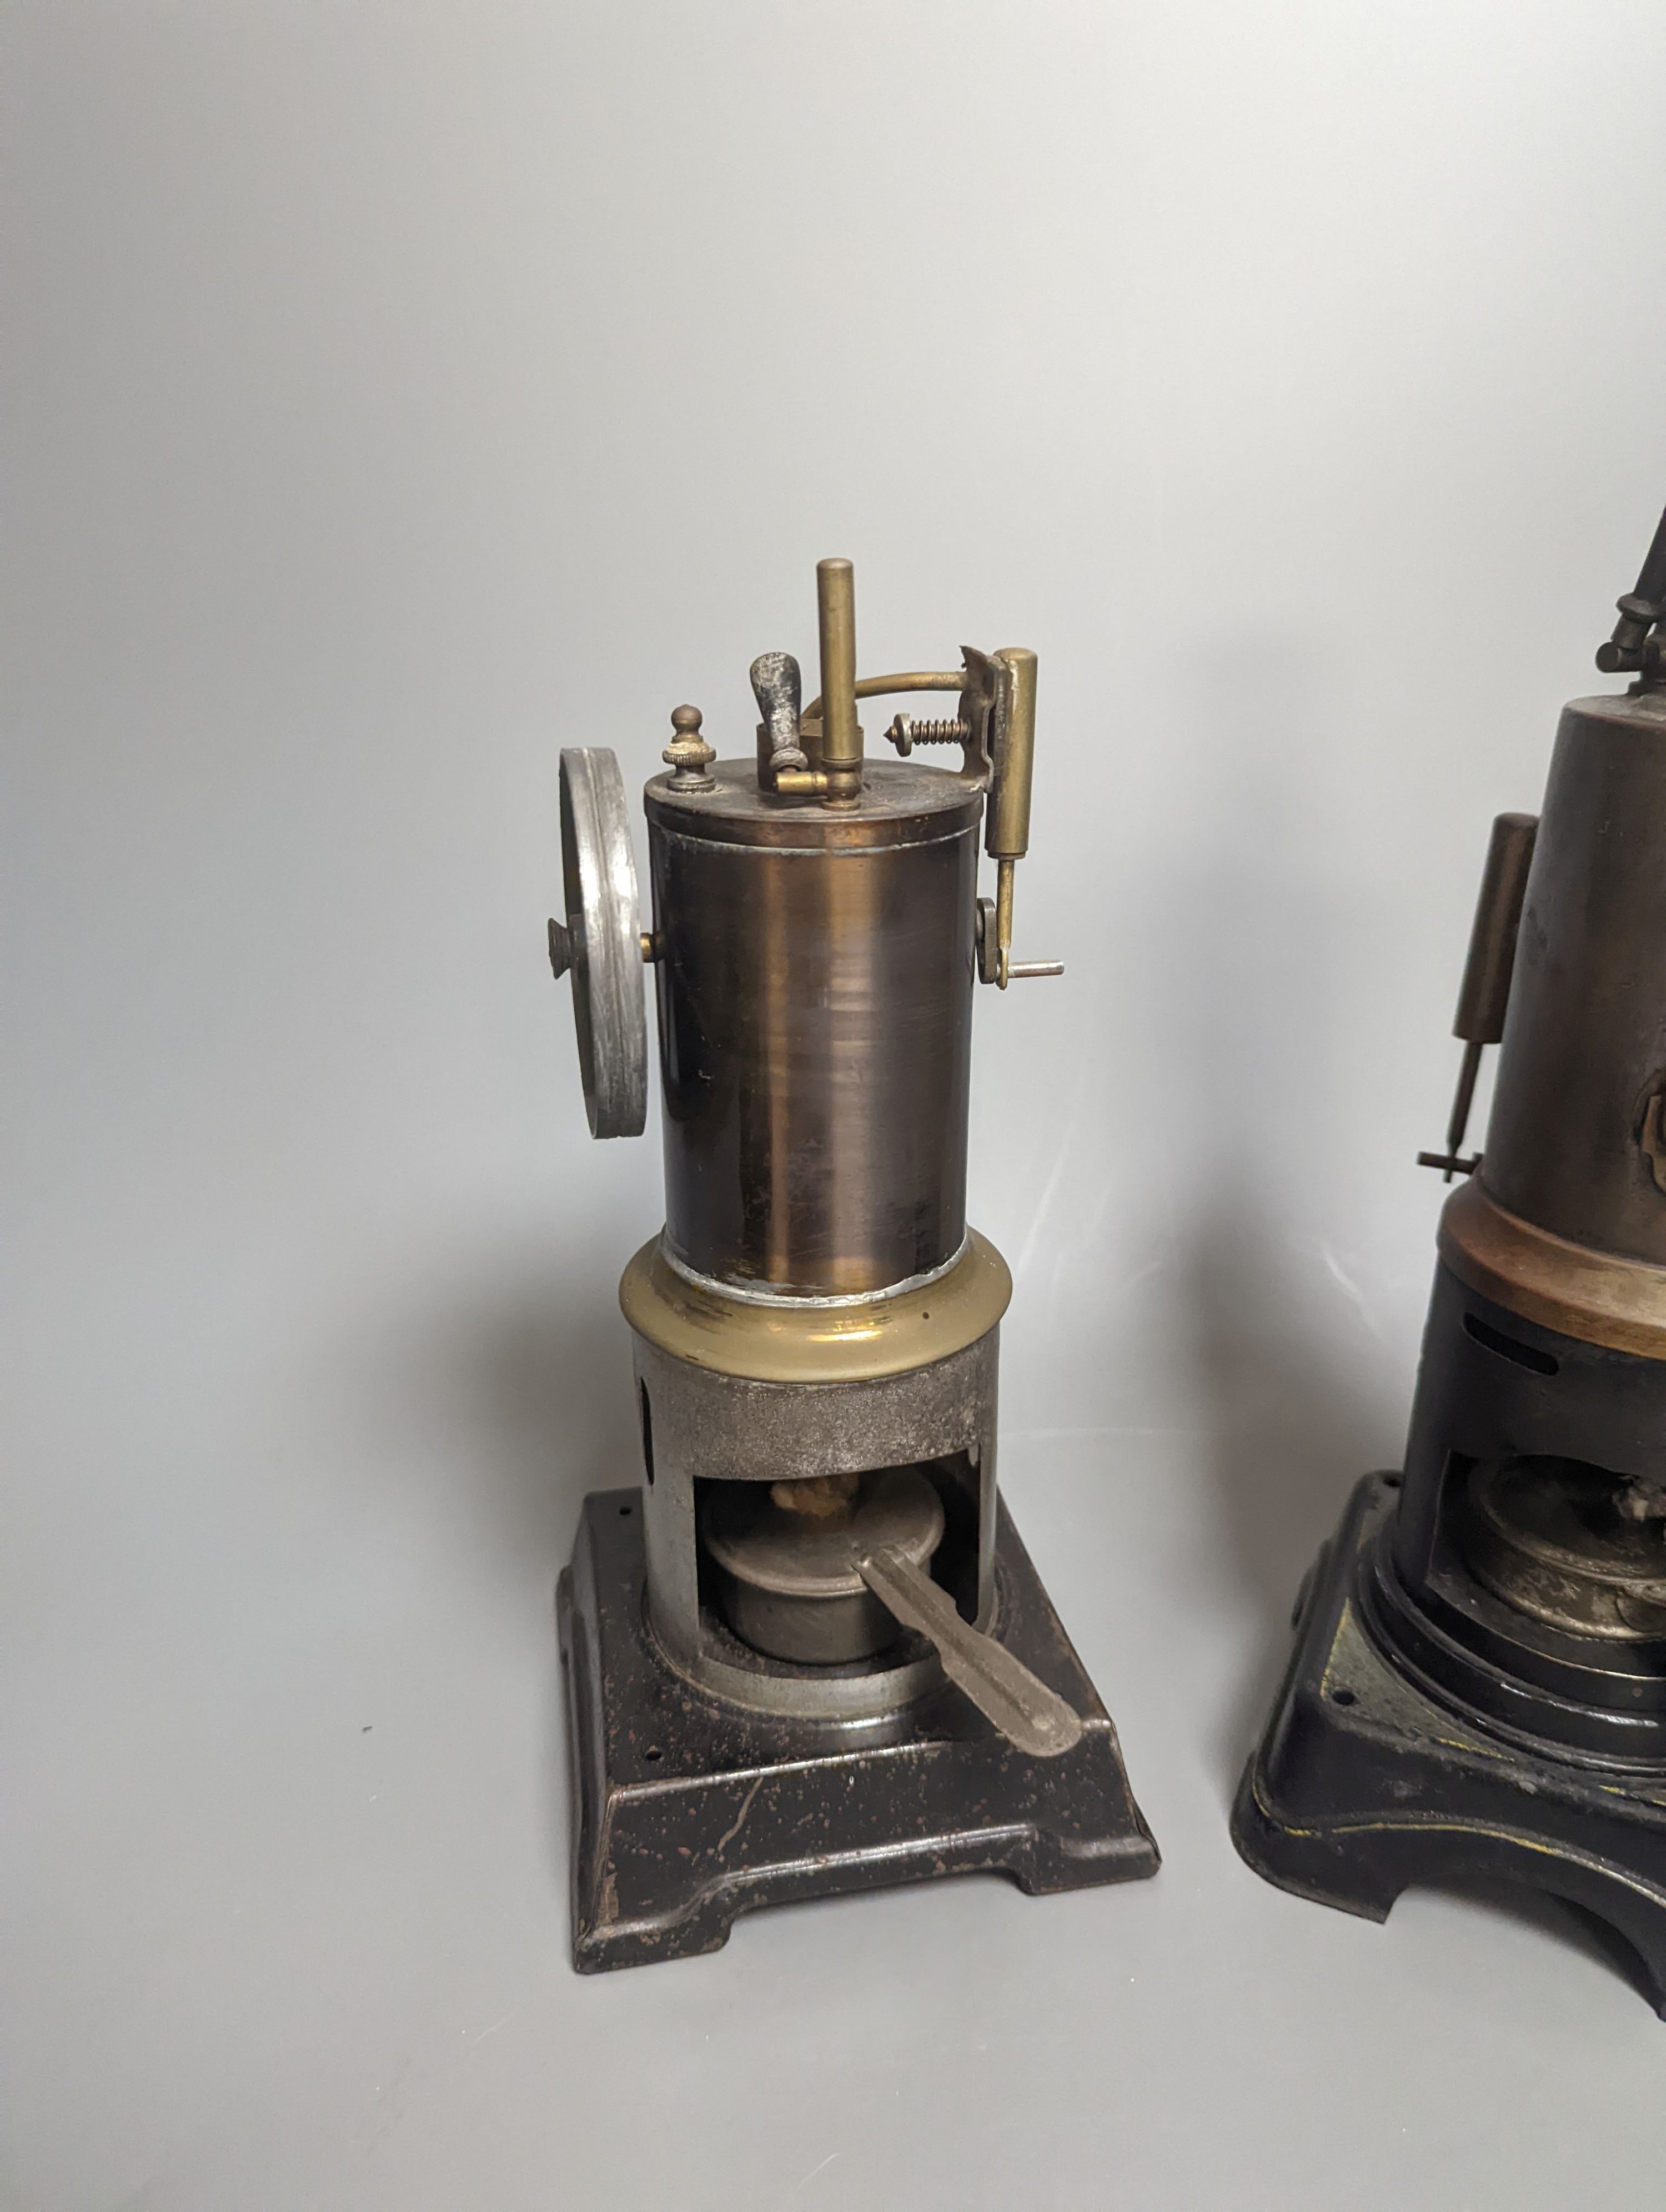 A Bing tinplate model boiler, 28.5 cm high and two other tinplate model boilers